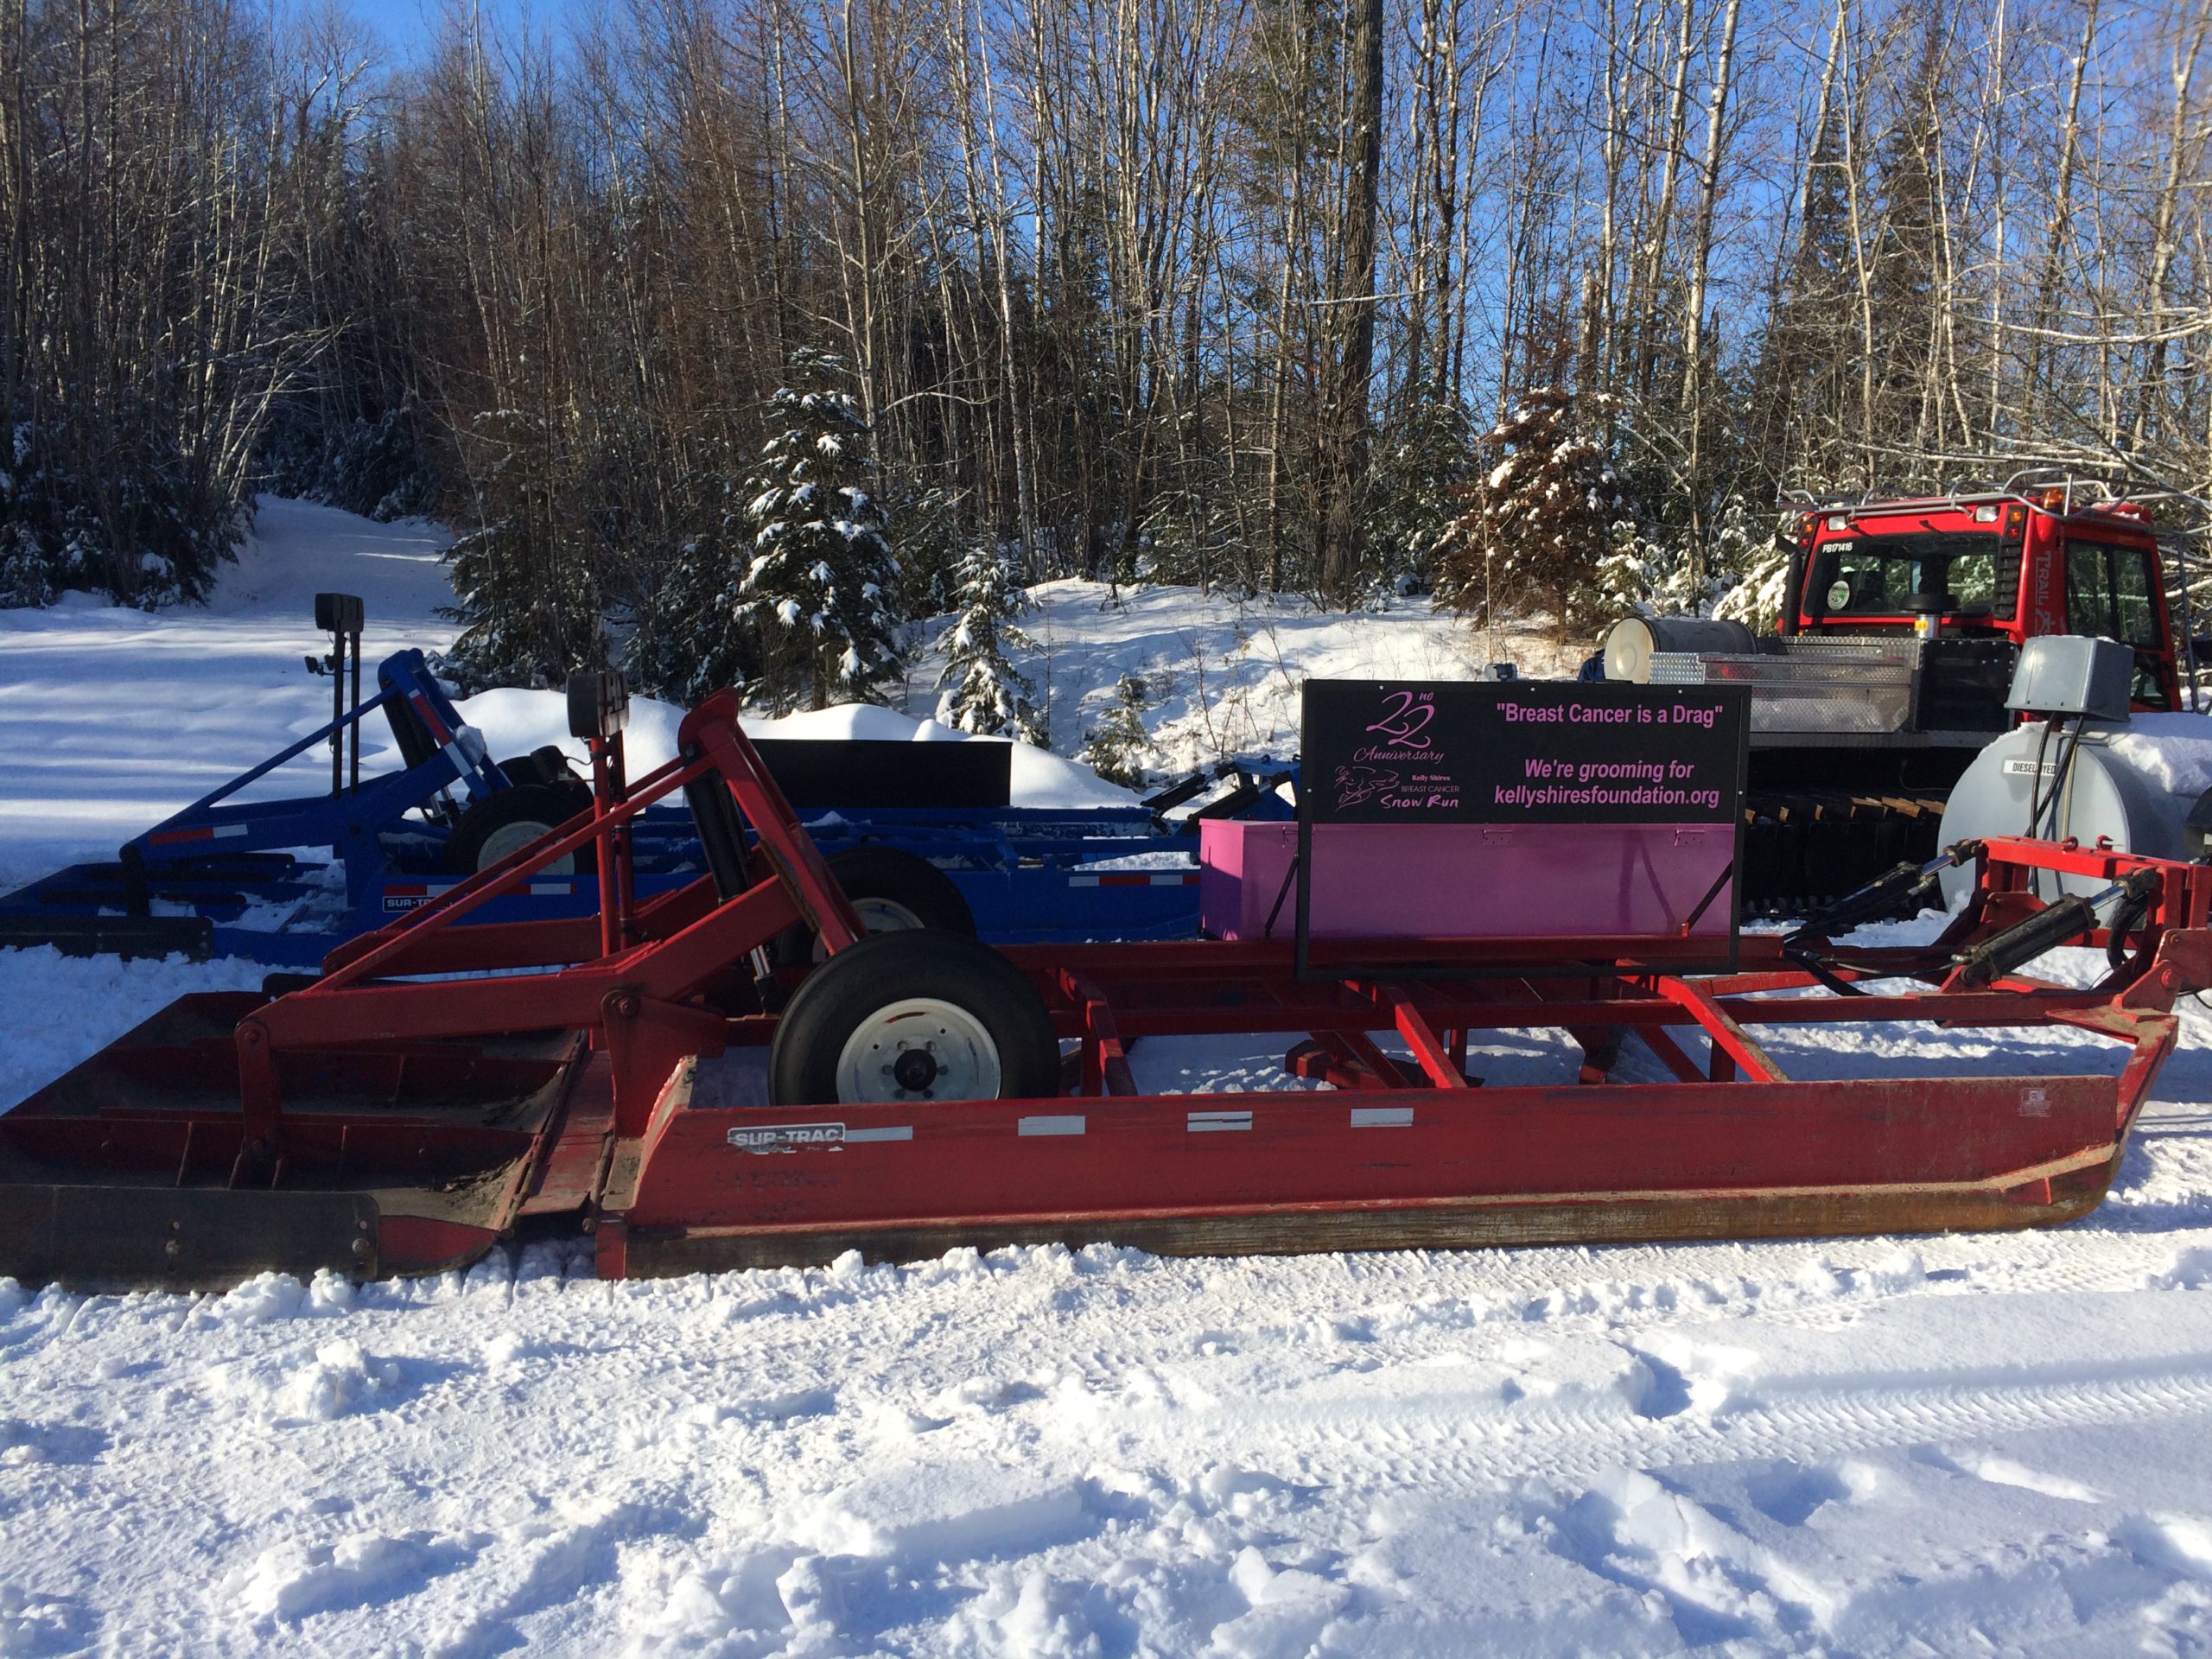 Local snowmobile club fundraising for breast cancer foundation